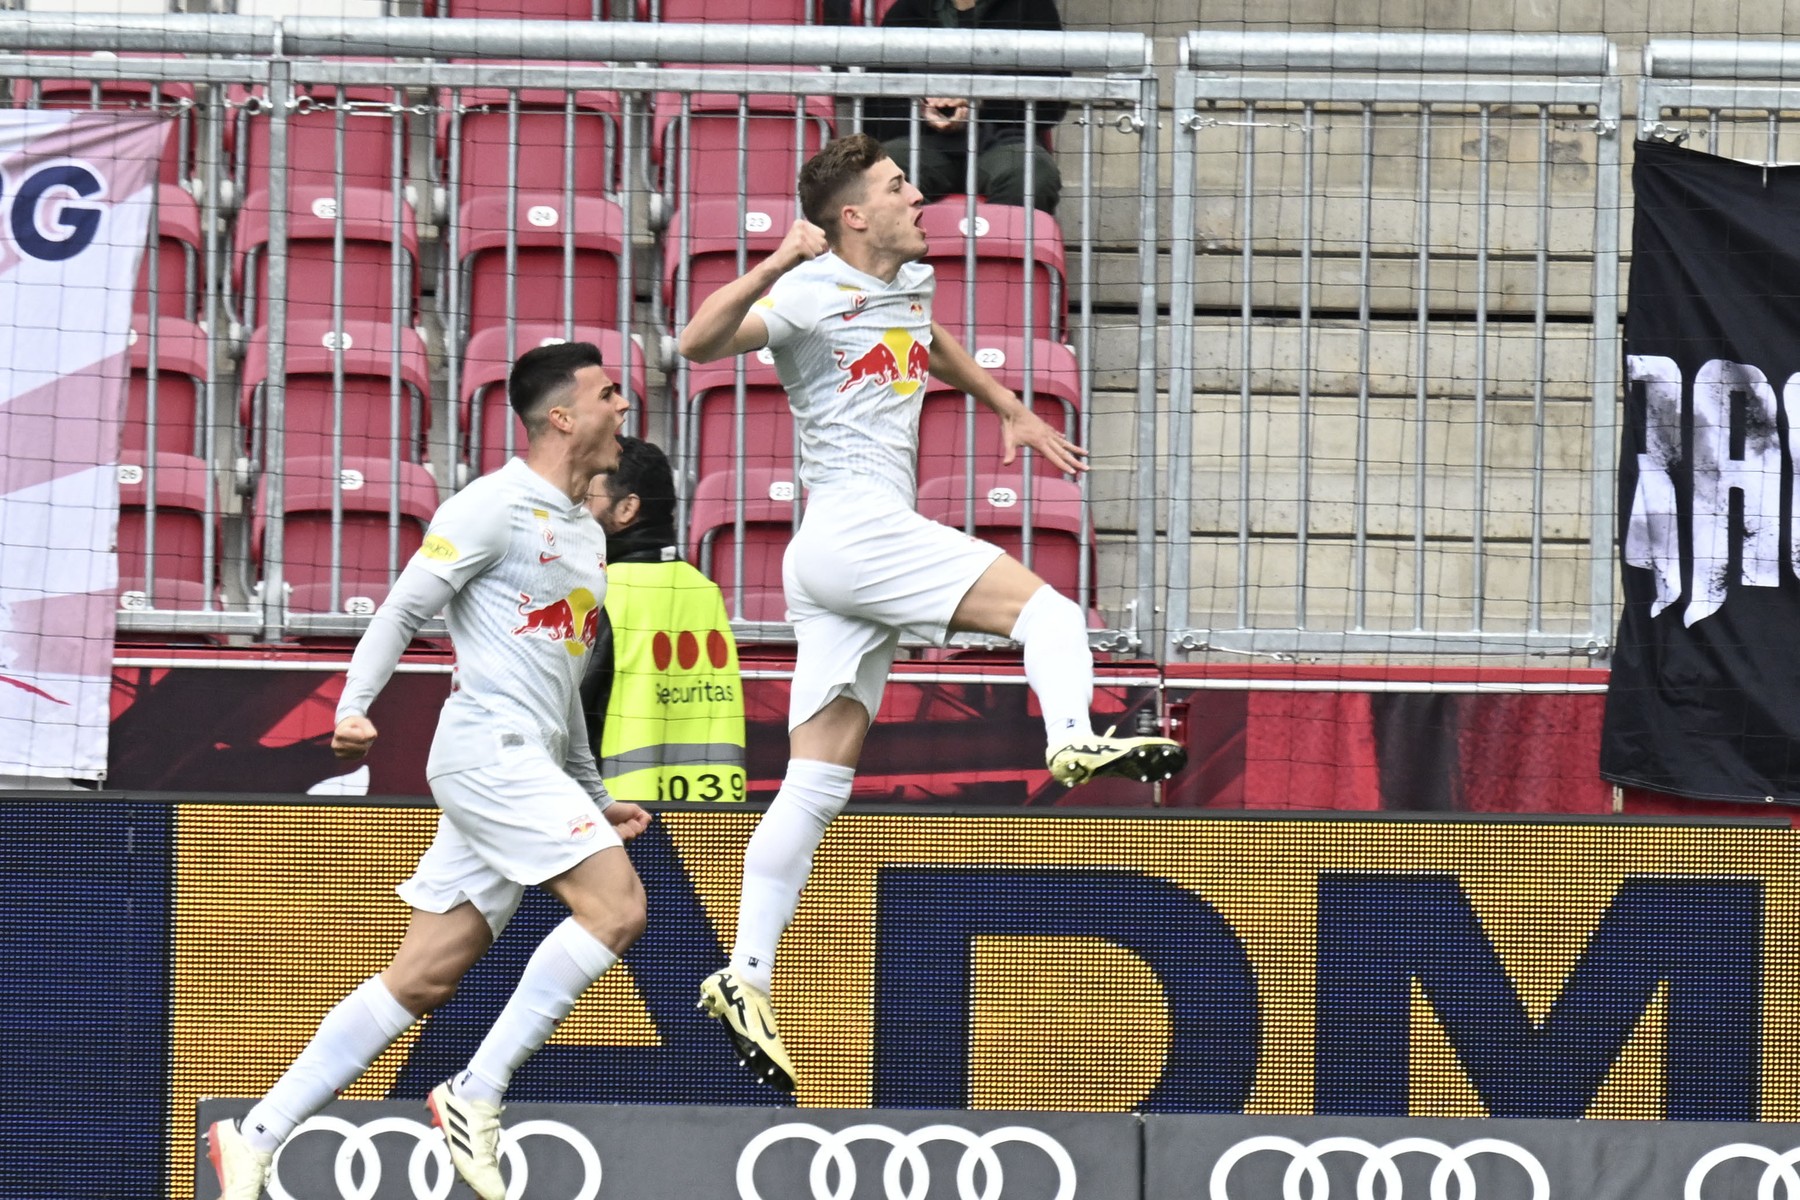 SALZBURG, AUSTRIA - APRIL 21: Luka Sucic of Salzburg celebrates after scoring a goal during the Admiral Bundesliga match between FC Red Bull Salzburg and SK Austria Klagenfurt at Red Bull Arena on April 21, 2024 in Salzburg, Austria. 240421_SEPA_26_007 - 20240421_PD7477,Image: 866739204, License: Rights-managed, Restrictions: AUSTRIA OUT, GERMANY OUT, SWITZERLAND OUT, UK OUT
SOUTH TYROL OUT, Model Release: no, Credit line: Hans Peter Lottermoser / AFP / Profimedia